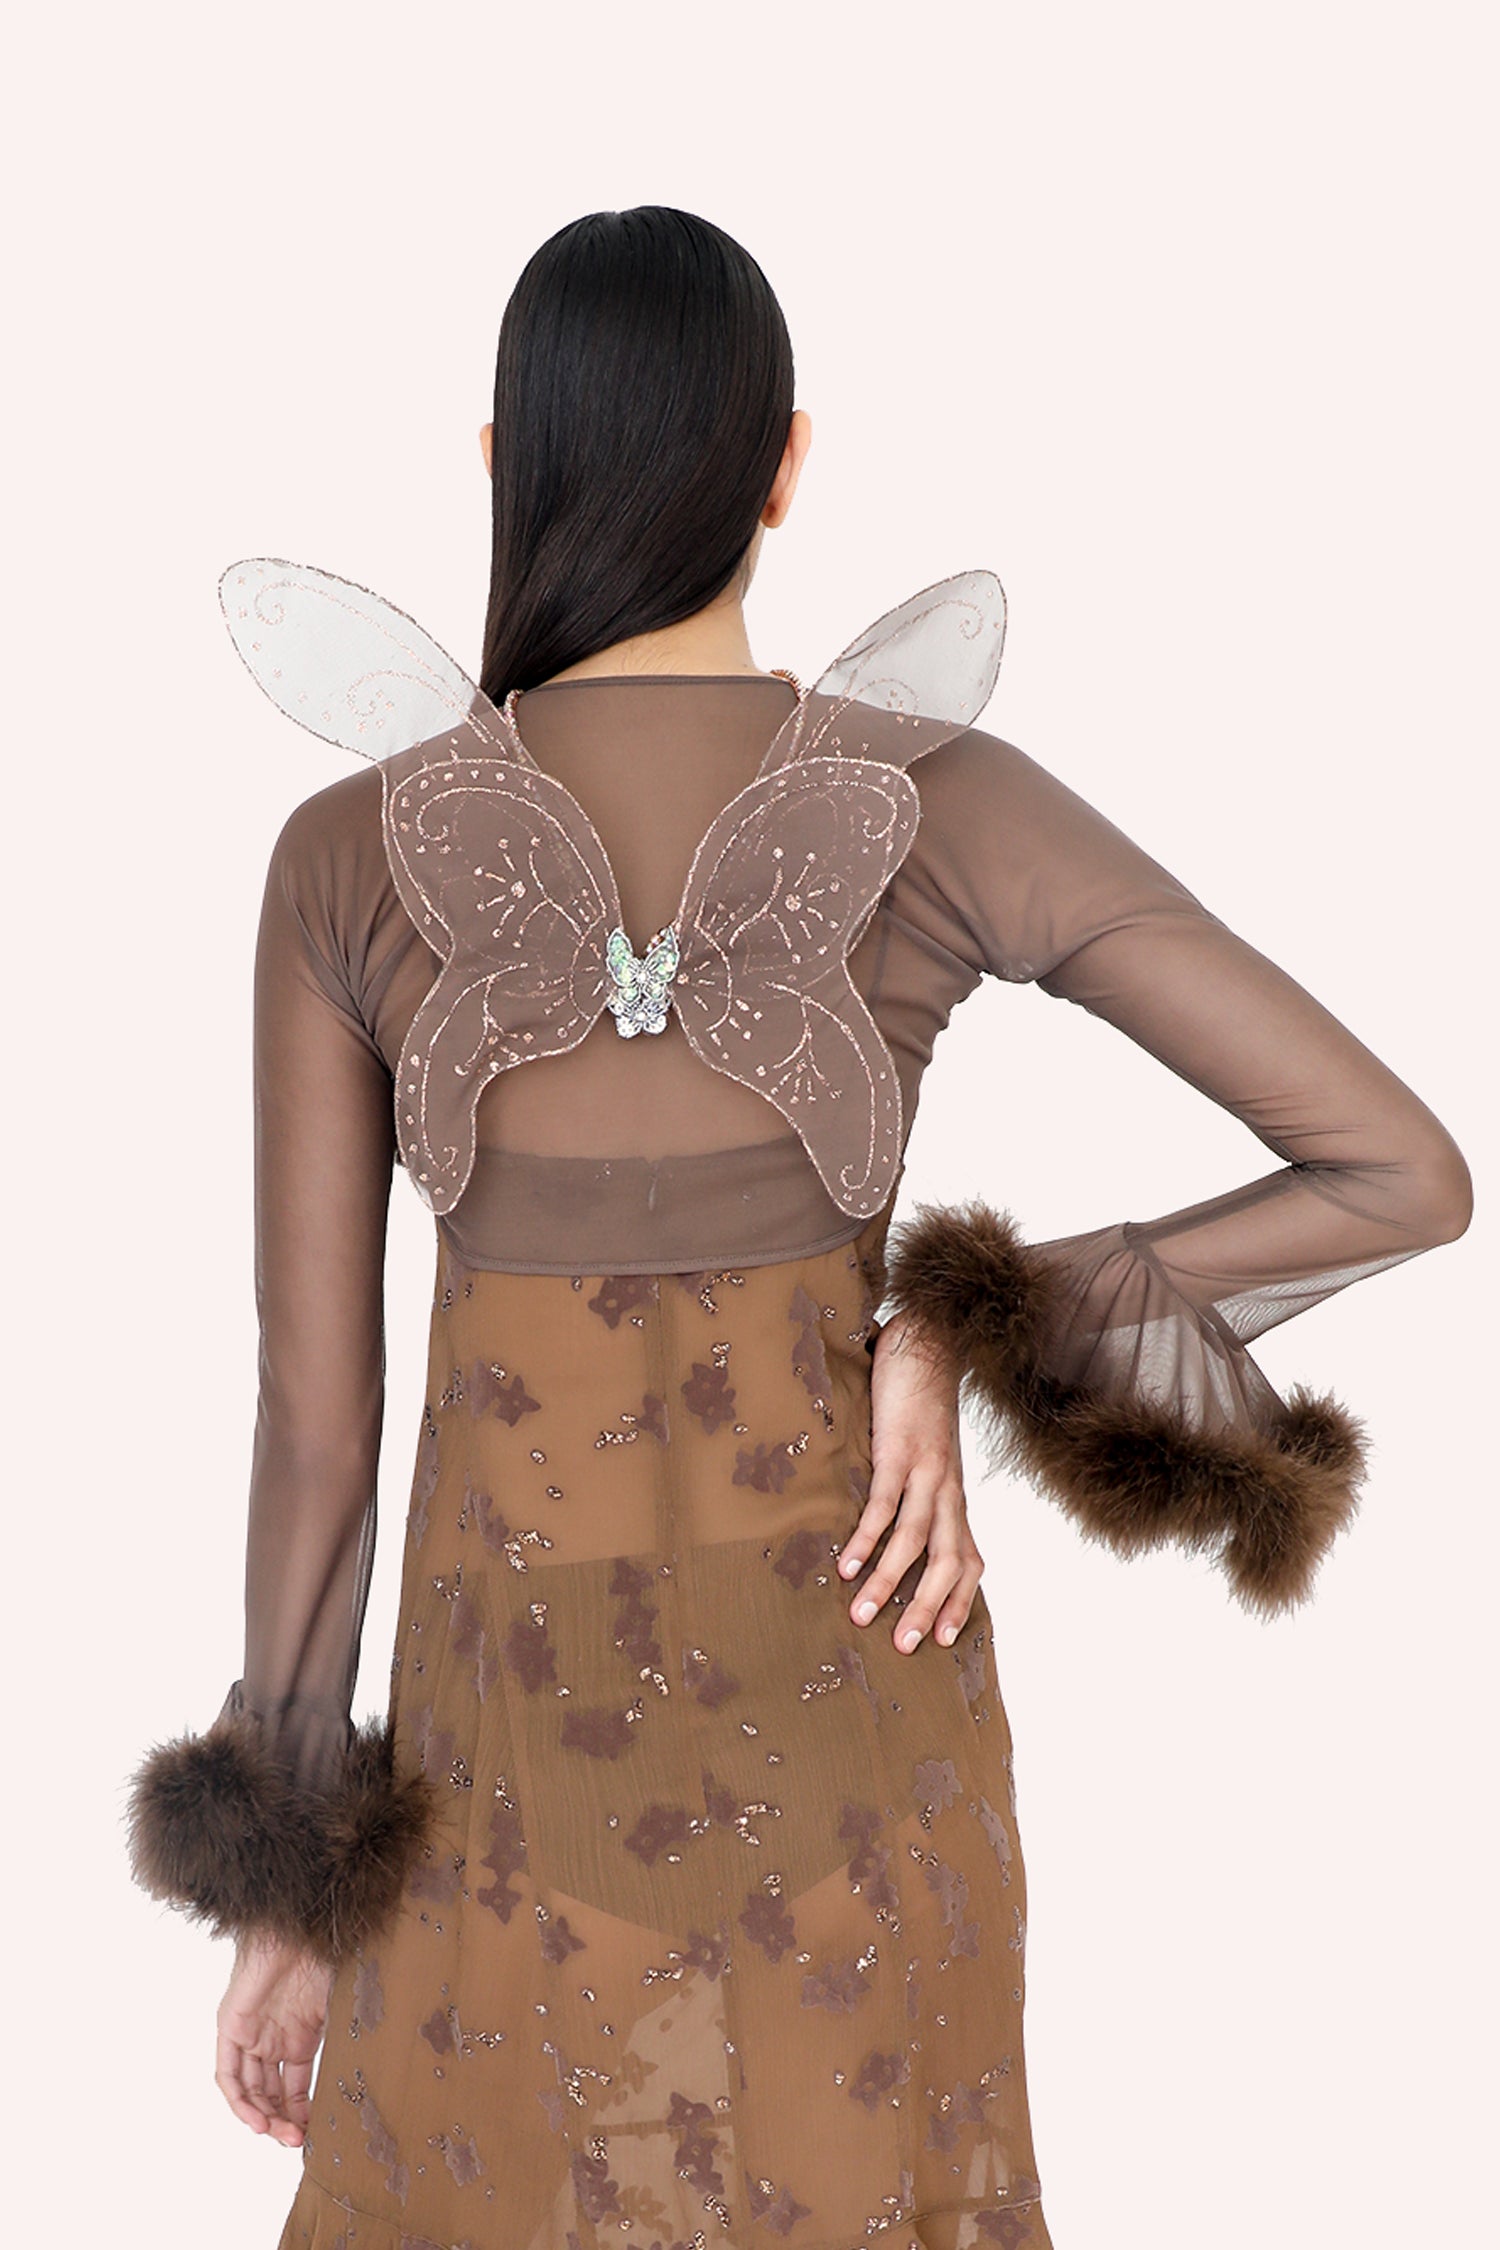 Limited Edition: Fairy Wings, light cocoa with golden floral incrustation, slightly above shoulders, to mid back